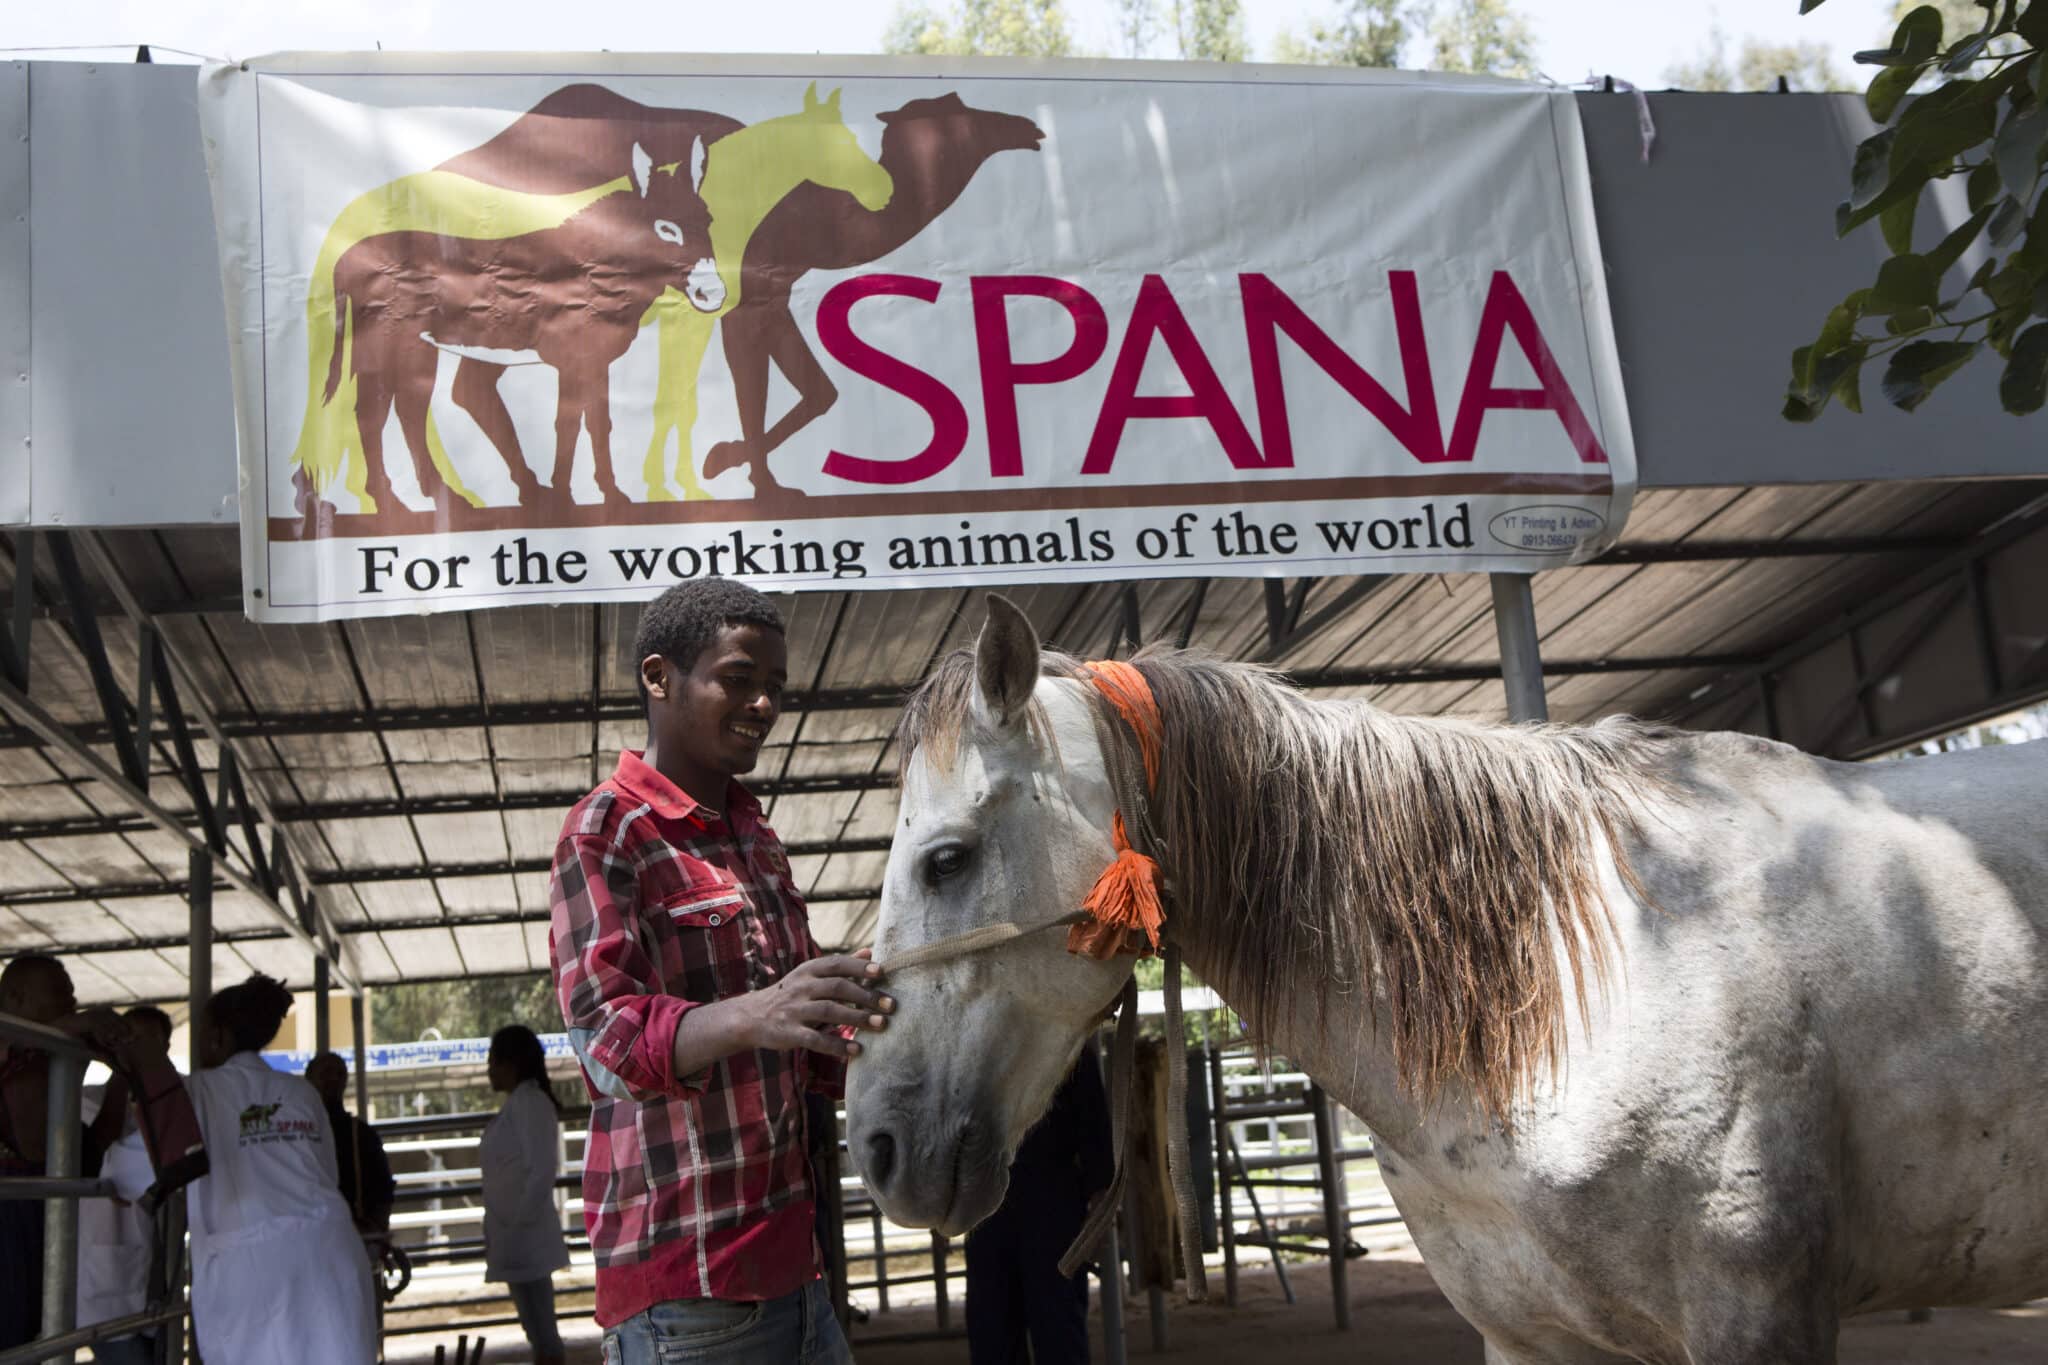 a man in red checked shirt strokes his white horse, standing under a SPANA sign